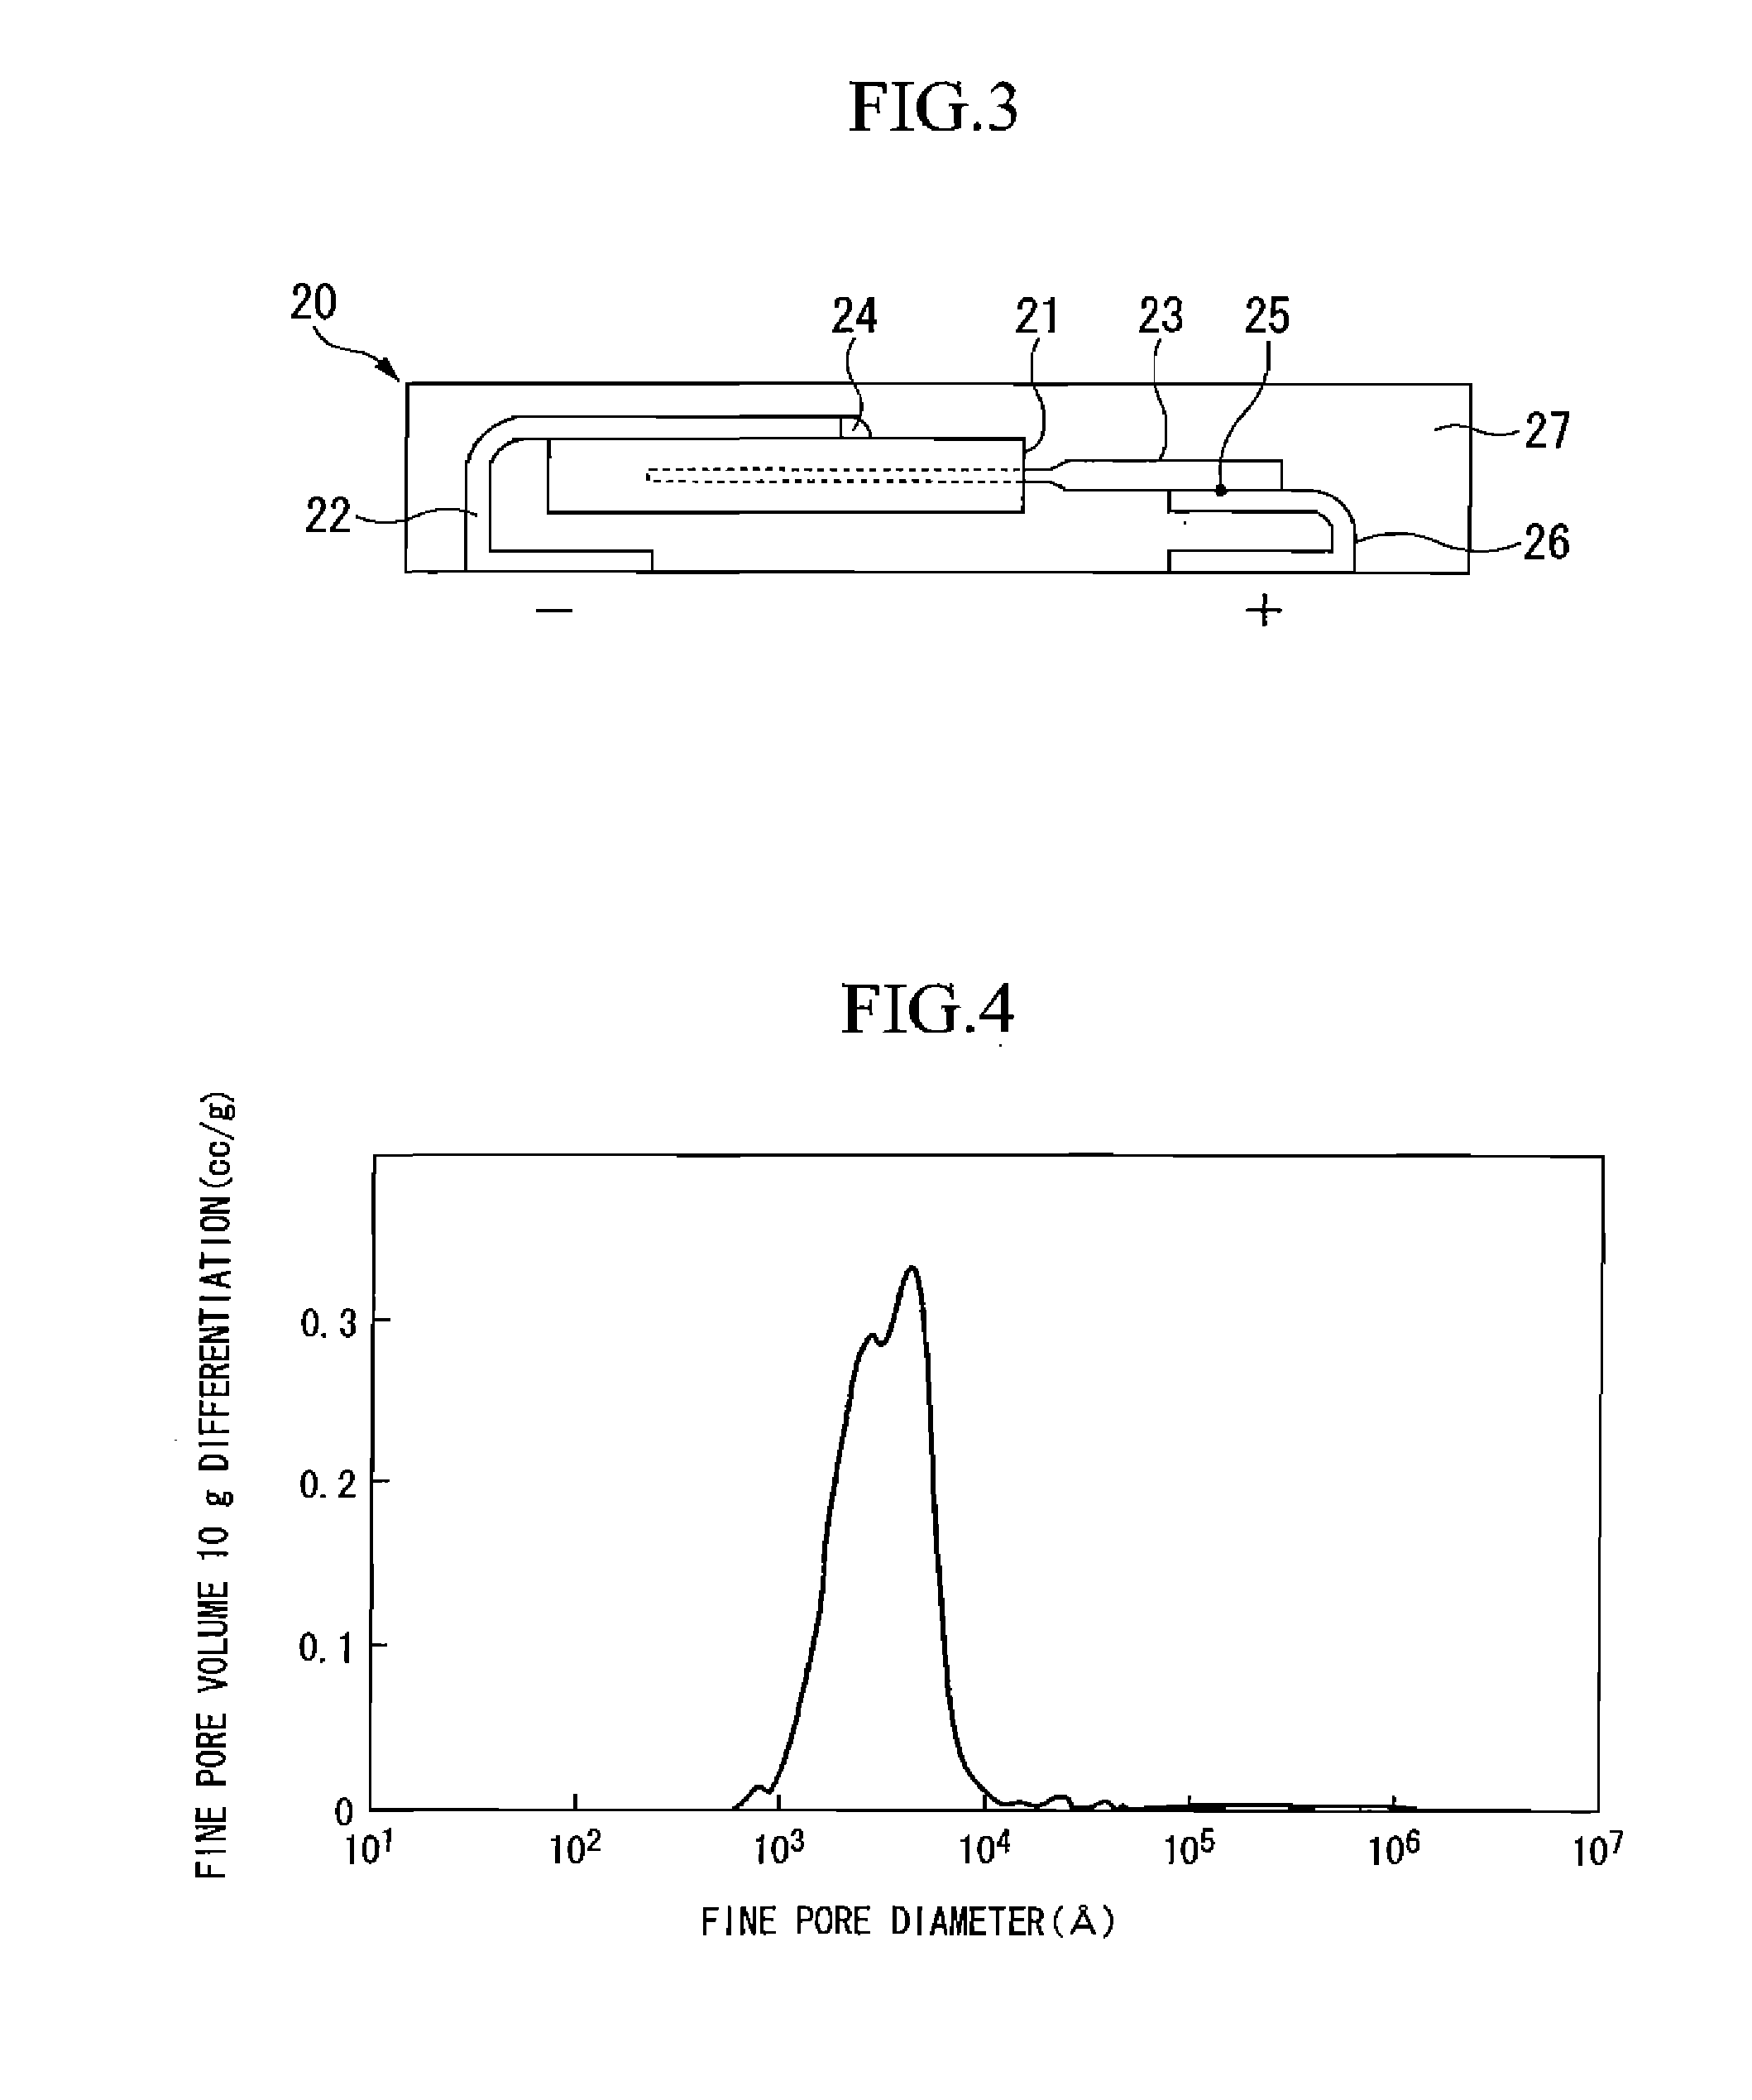 Process for Producing Porous Sintered Metal